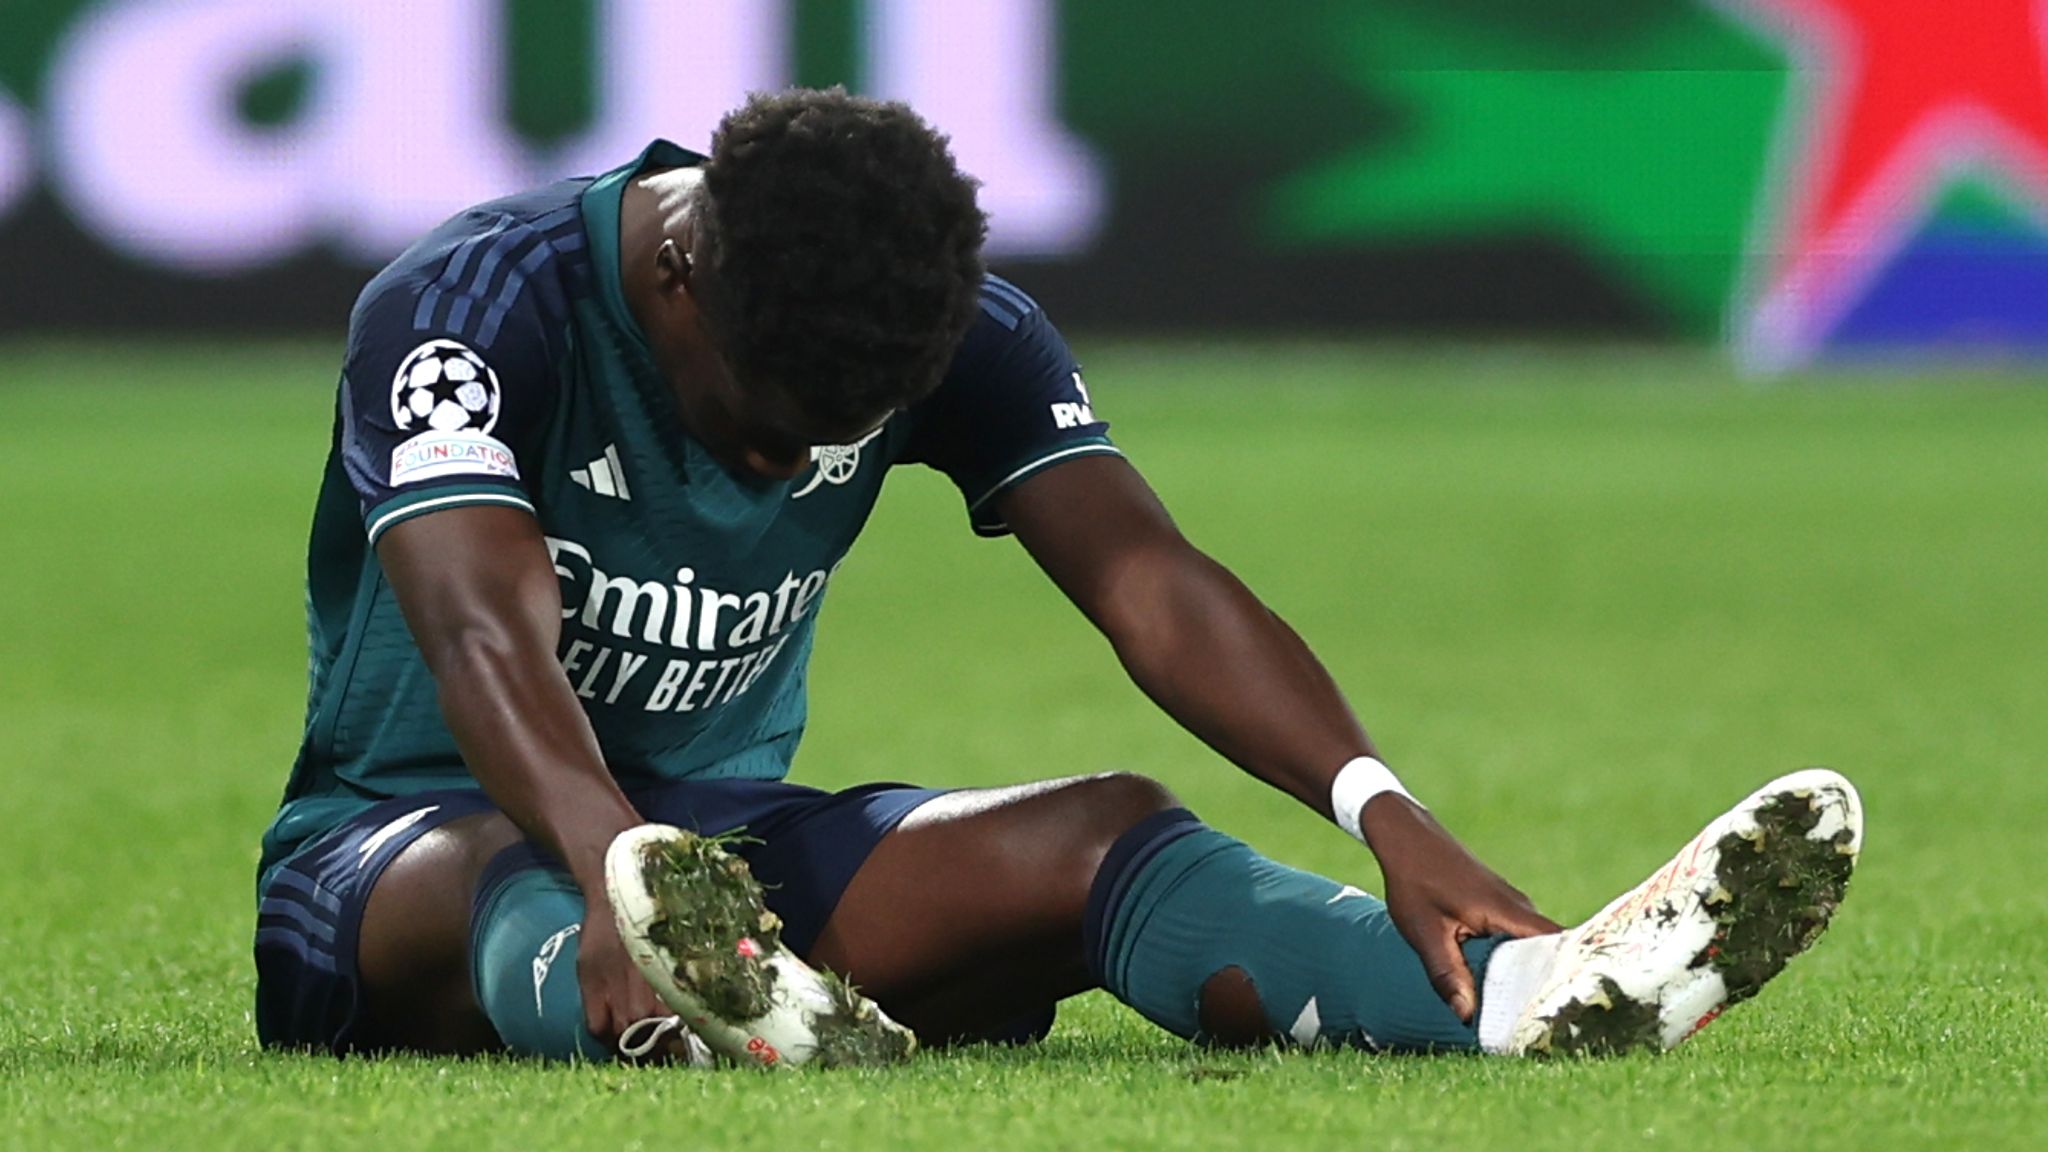 Bukayo Saka ruled out of England games through injury, no replacements planned for Gareth Southgate's squad | Football News | Sky Sports